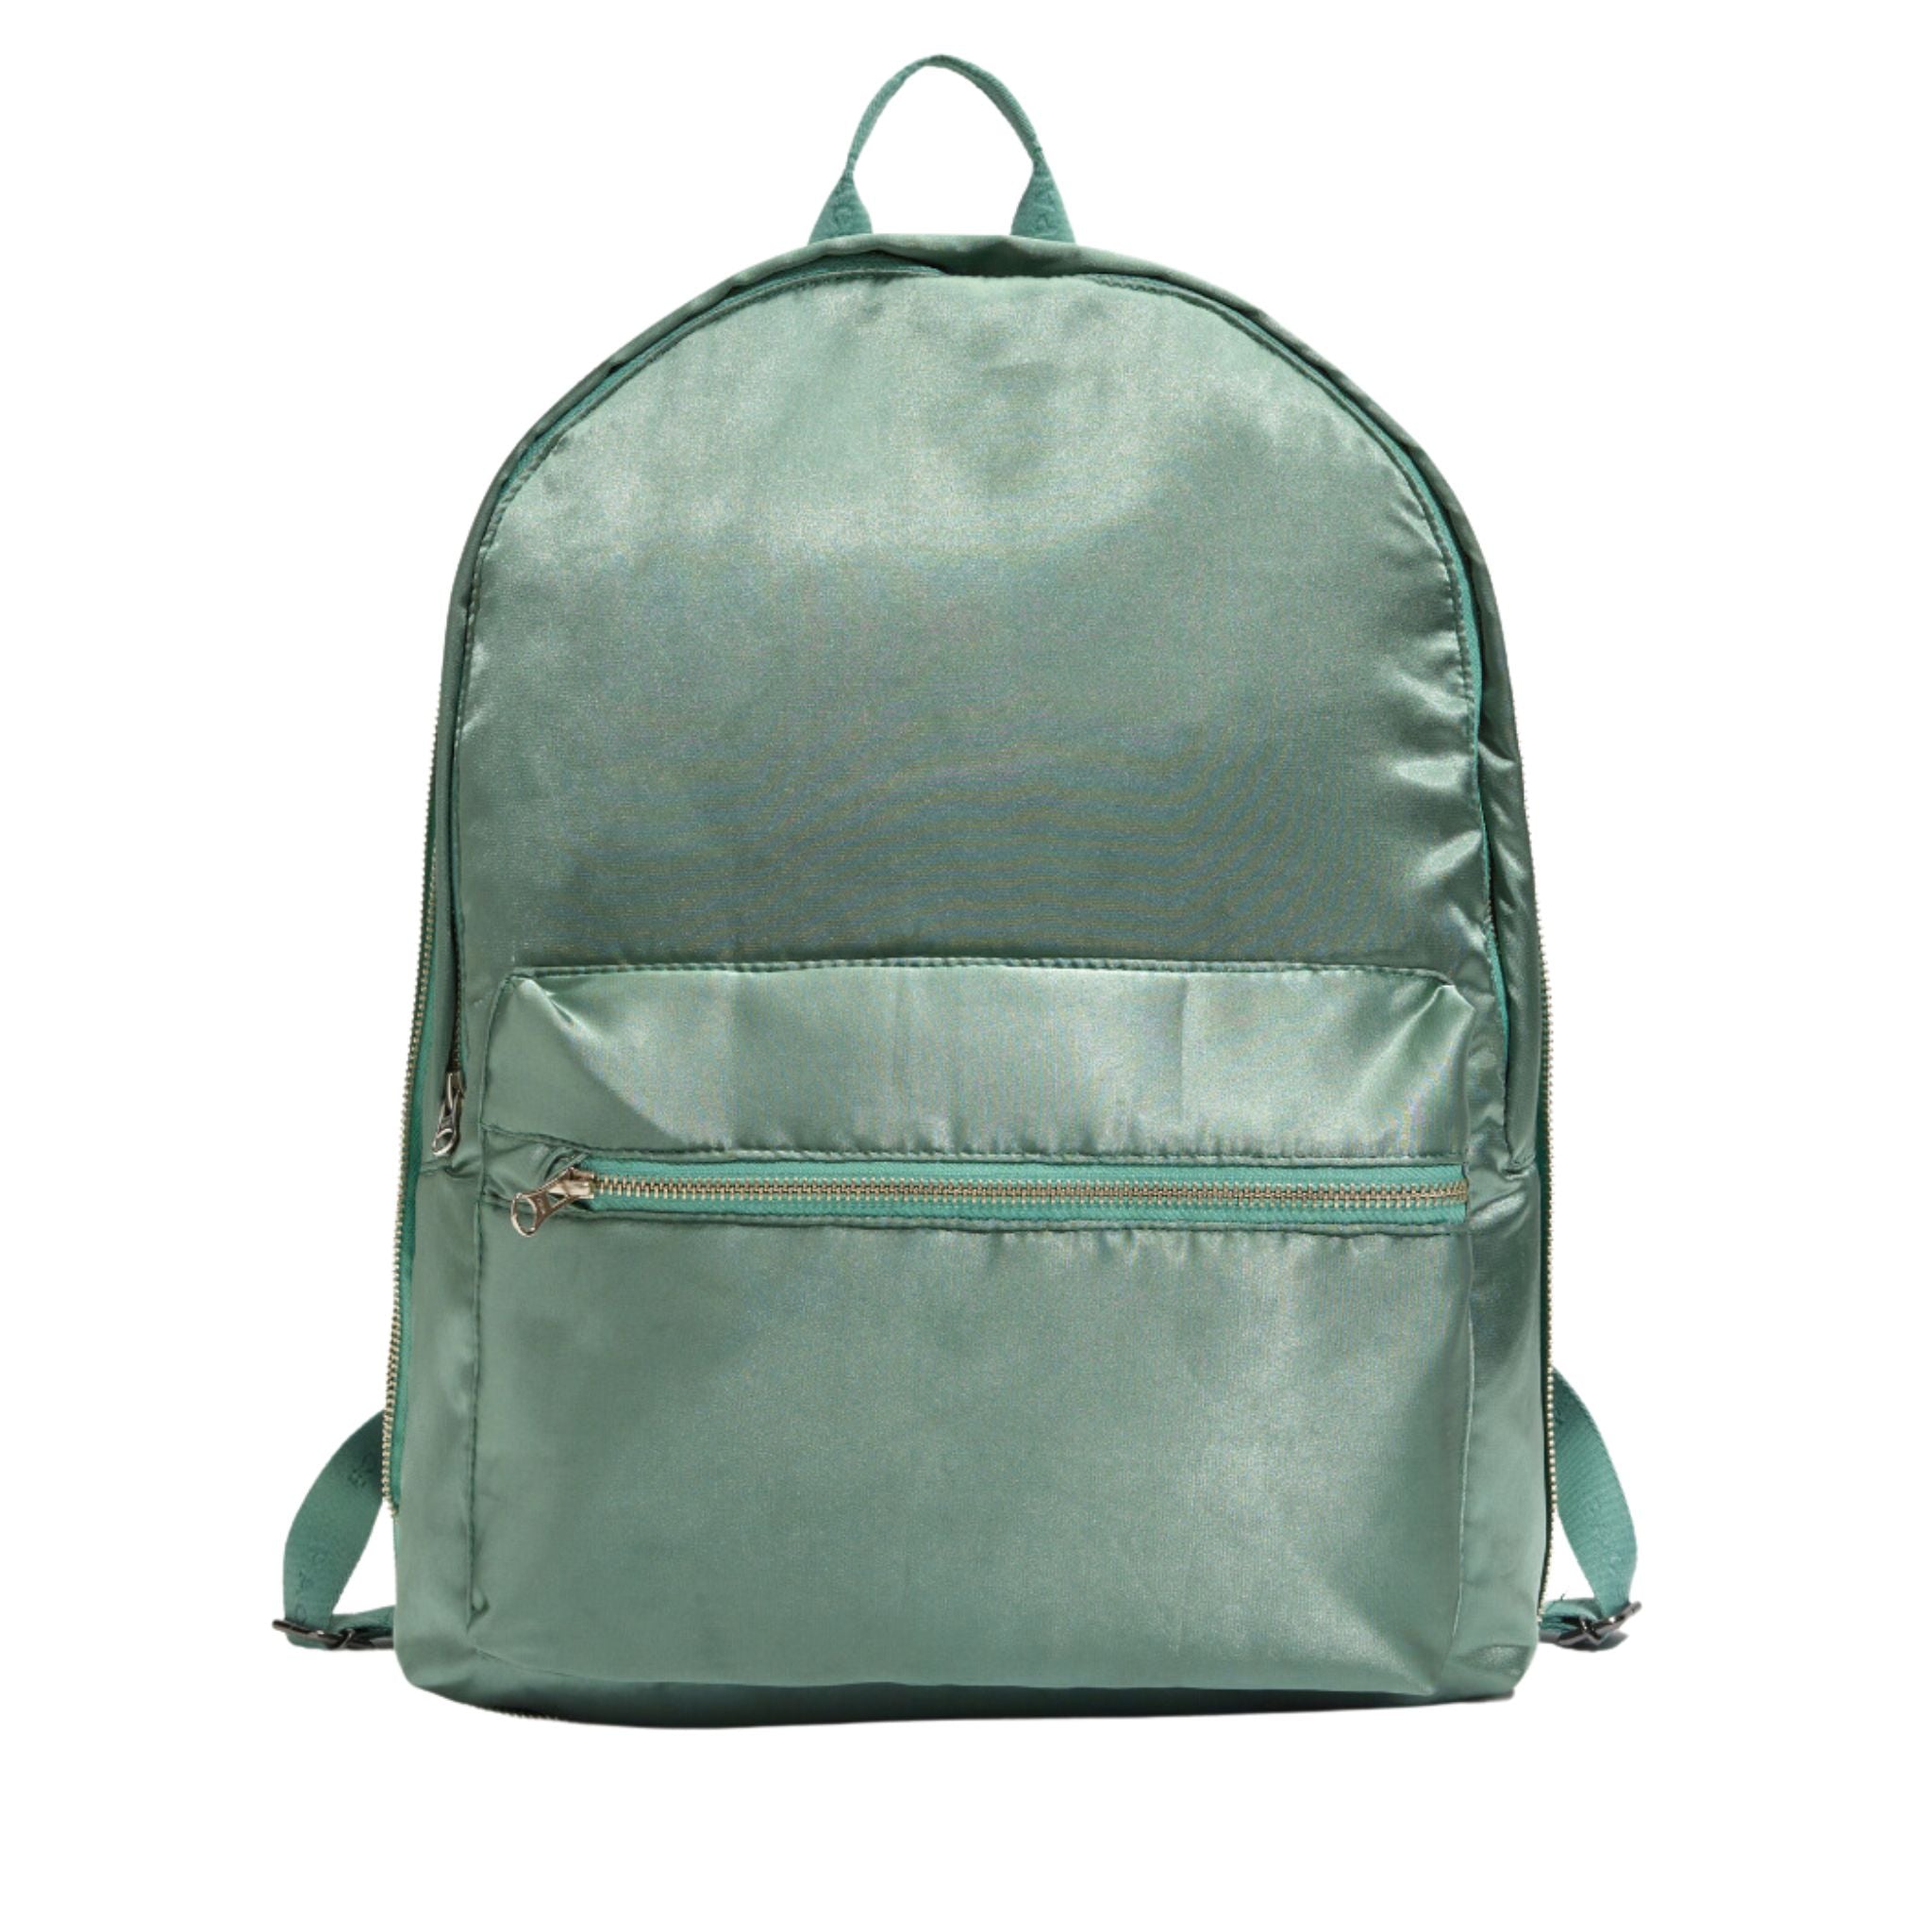 PACE - Standard Nylon Backpack "Green" - THE GAME